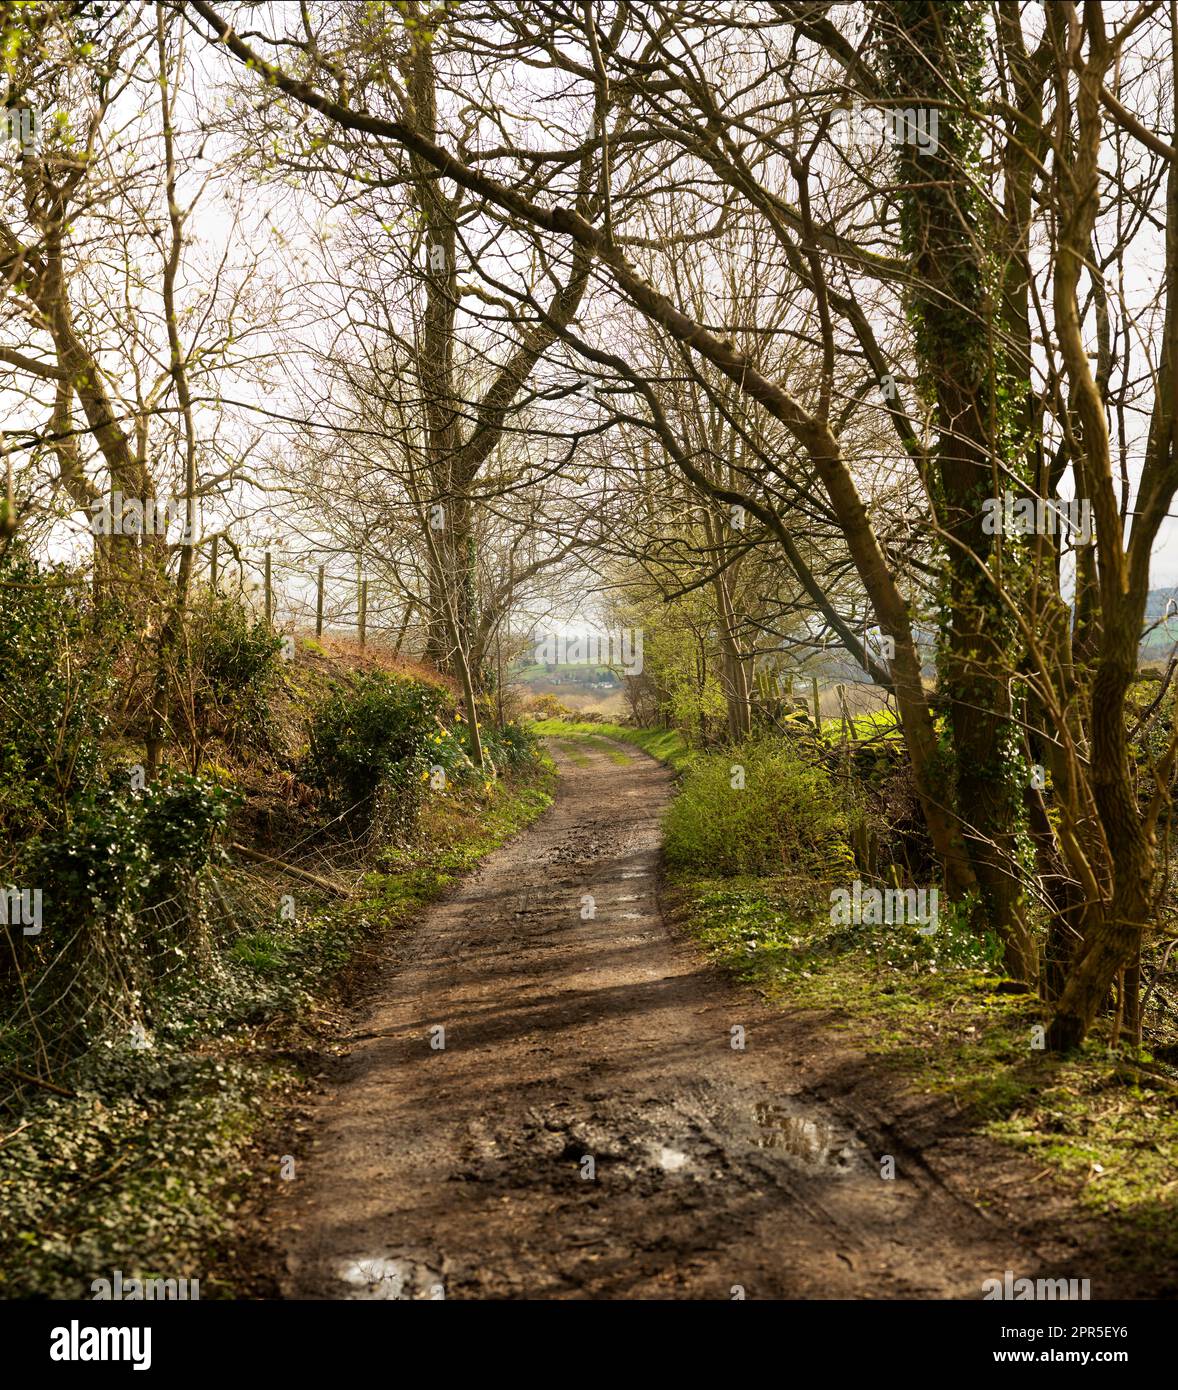 A country lane in the Derbyshire Peak District on an early spring day. Walking through the English countryside as the season changes. Stock Photo